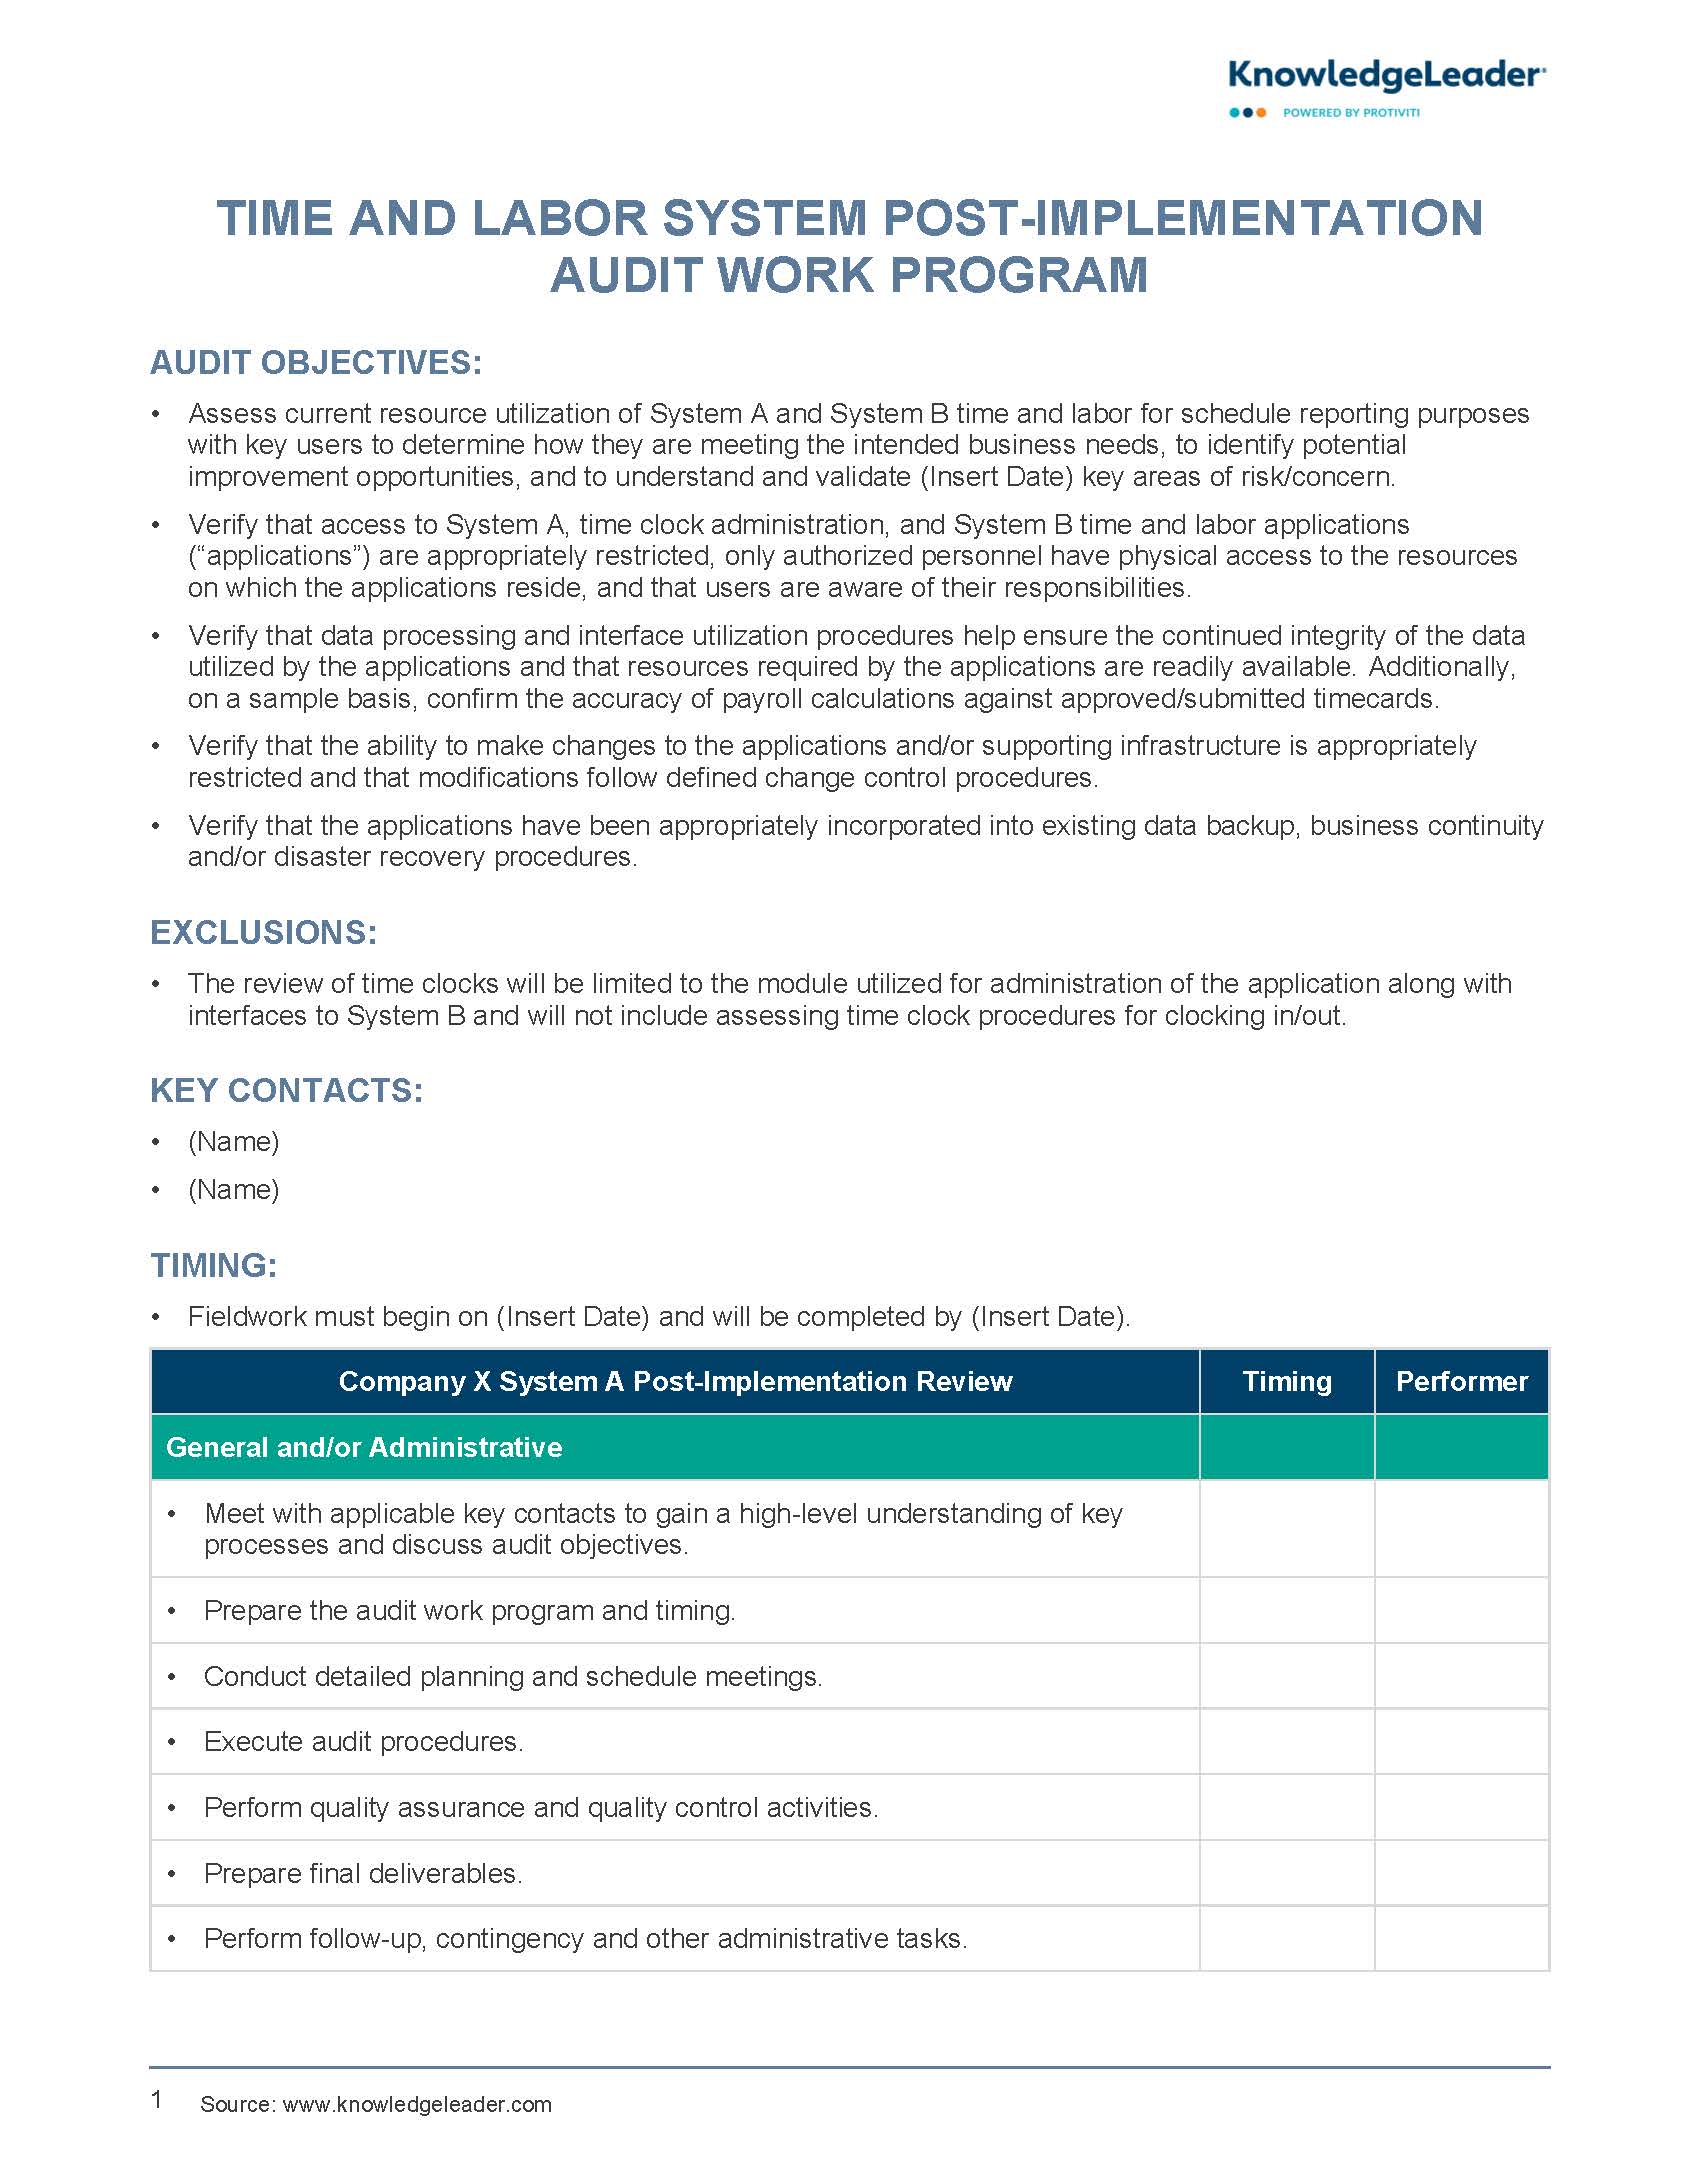 Screenshot of the first page of Time and Labor System Post-Implementation Audit Work Program